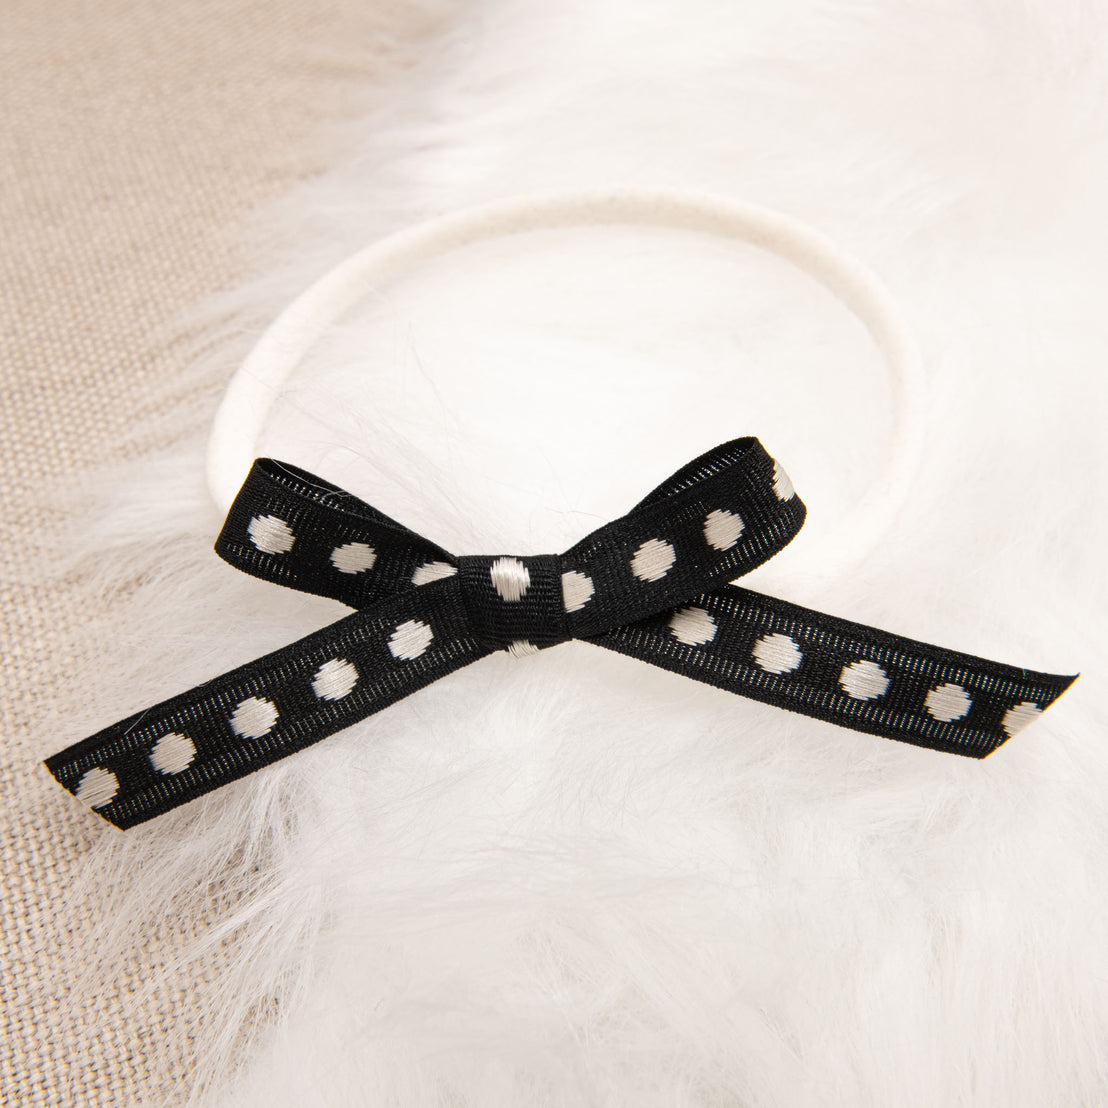 A stylish June Bow Headband with white polka dots tied into a bow, set against a white fluffy background.